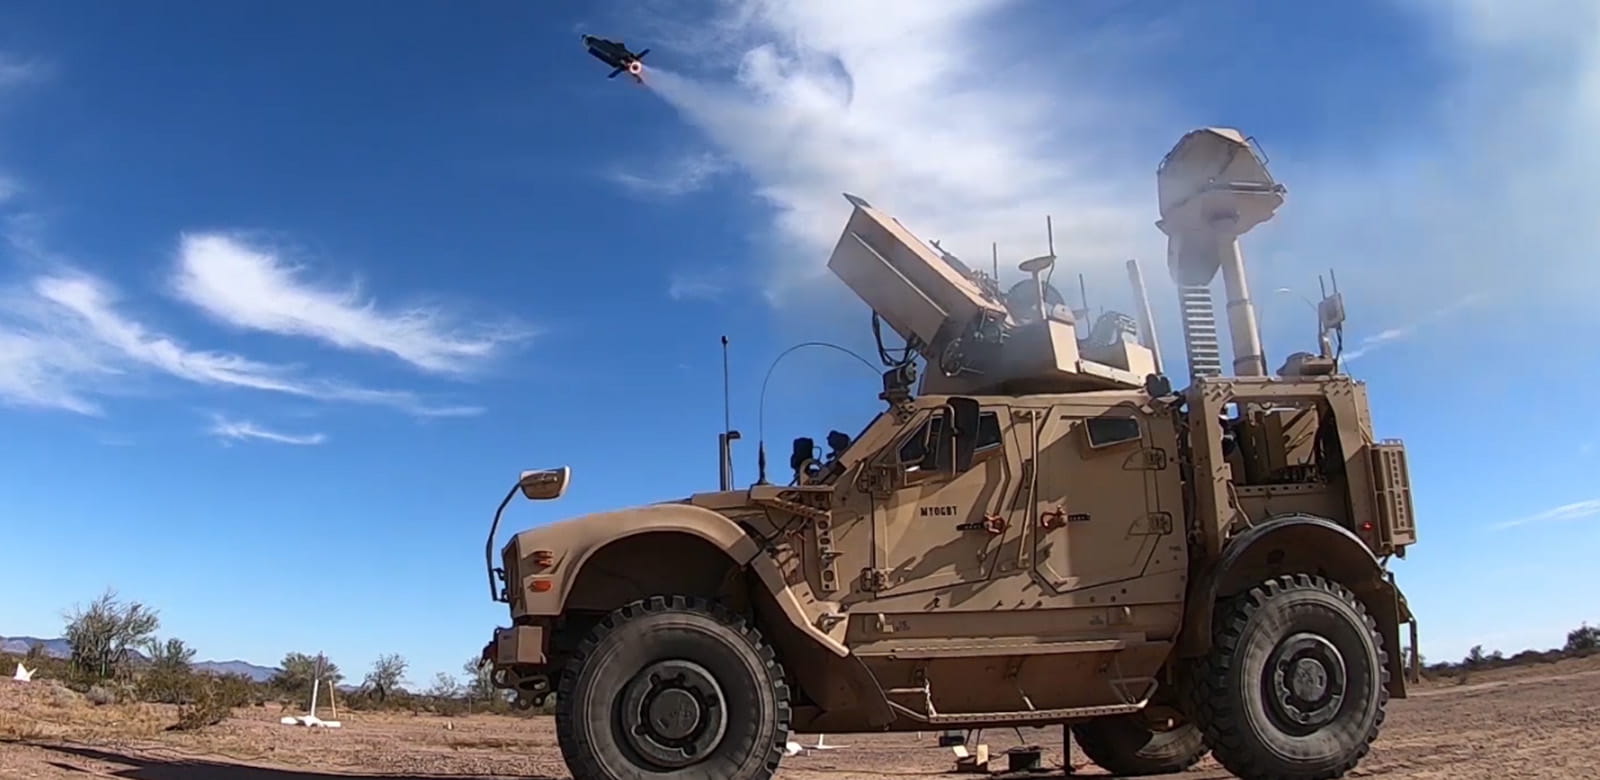 The Coyote Block 2 defeated threats at longer ranges and higher altitudes than similar class effectors, gaining U.S. Army approval for deployment.